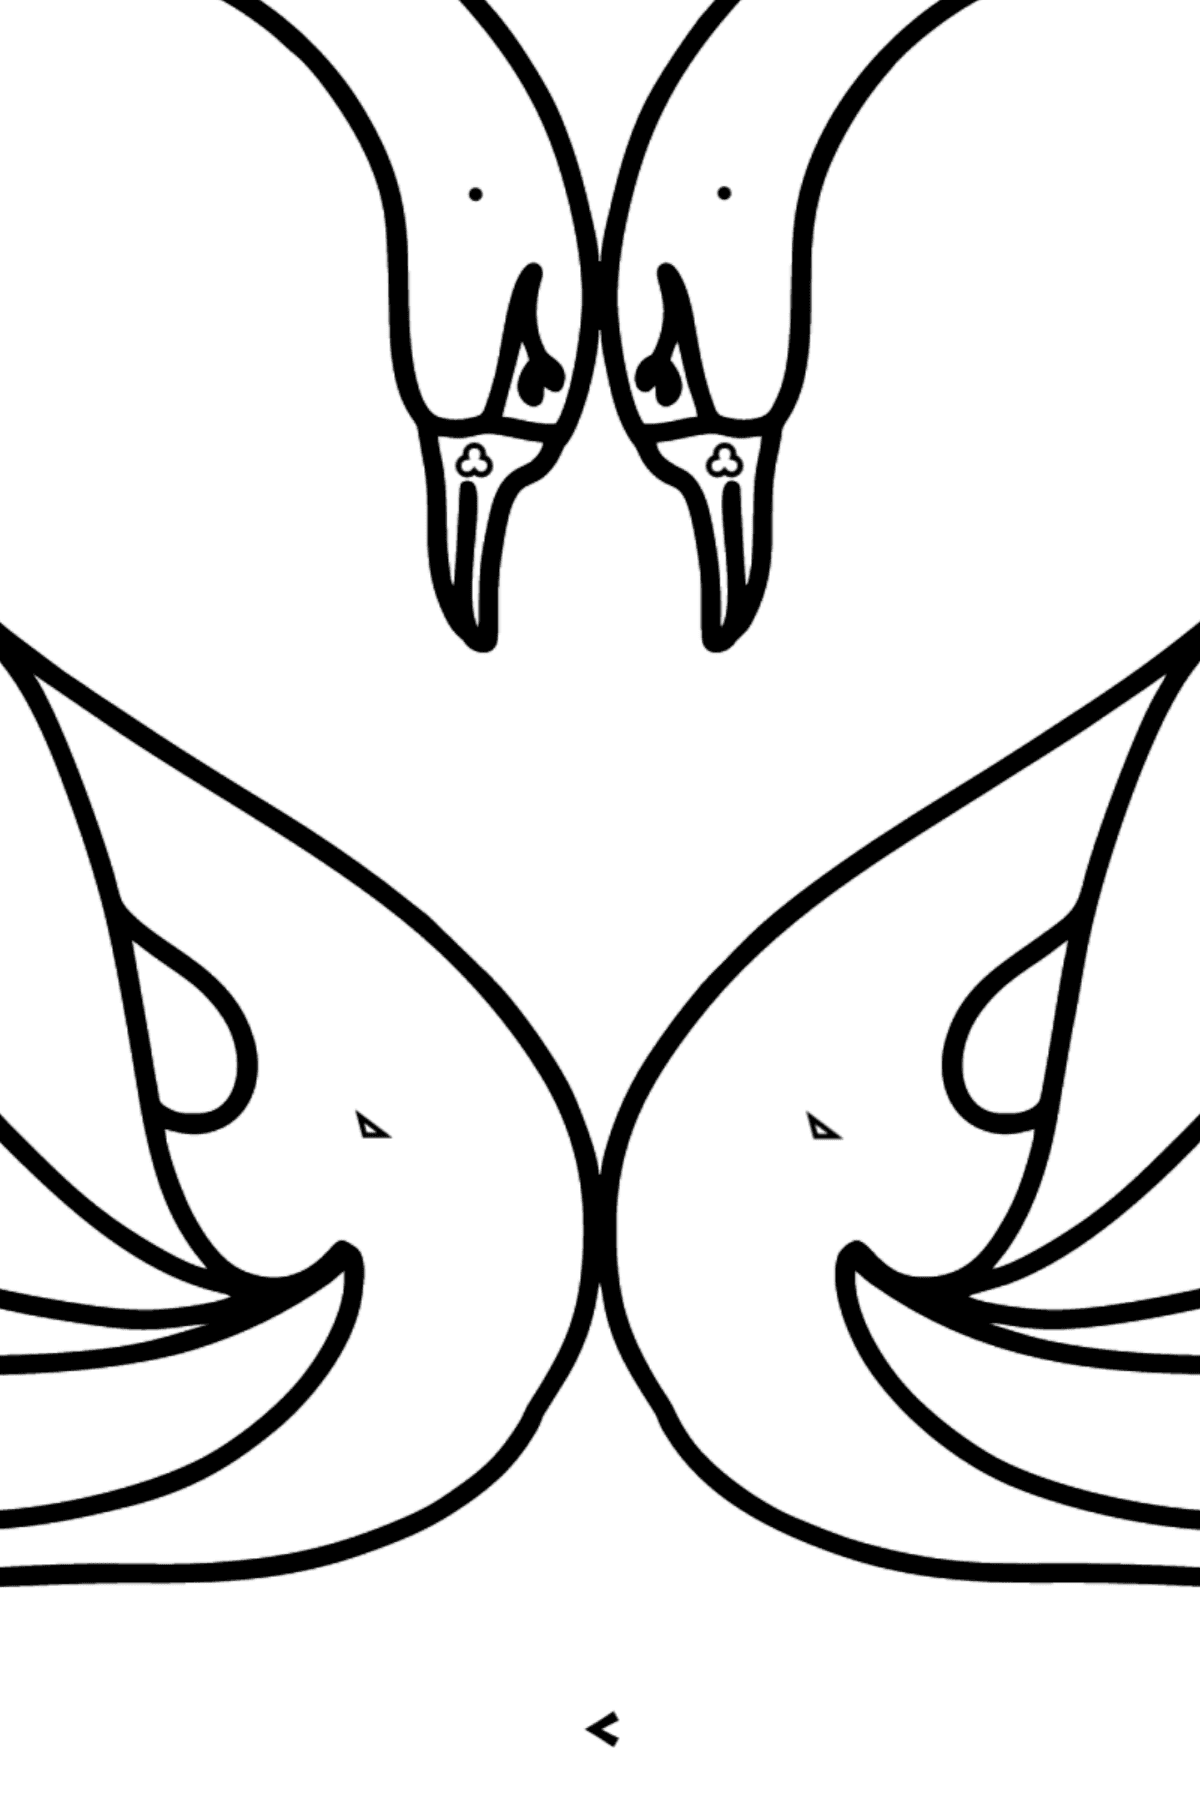 Black Swans coloring page - Coloring by Symbols and Geometric Shapes for Kids